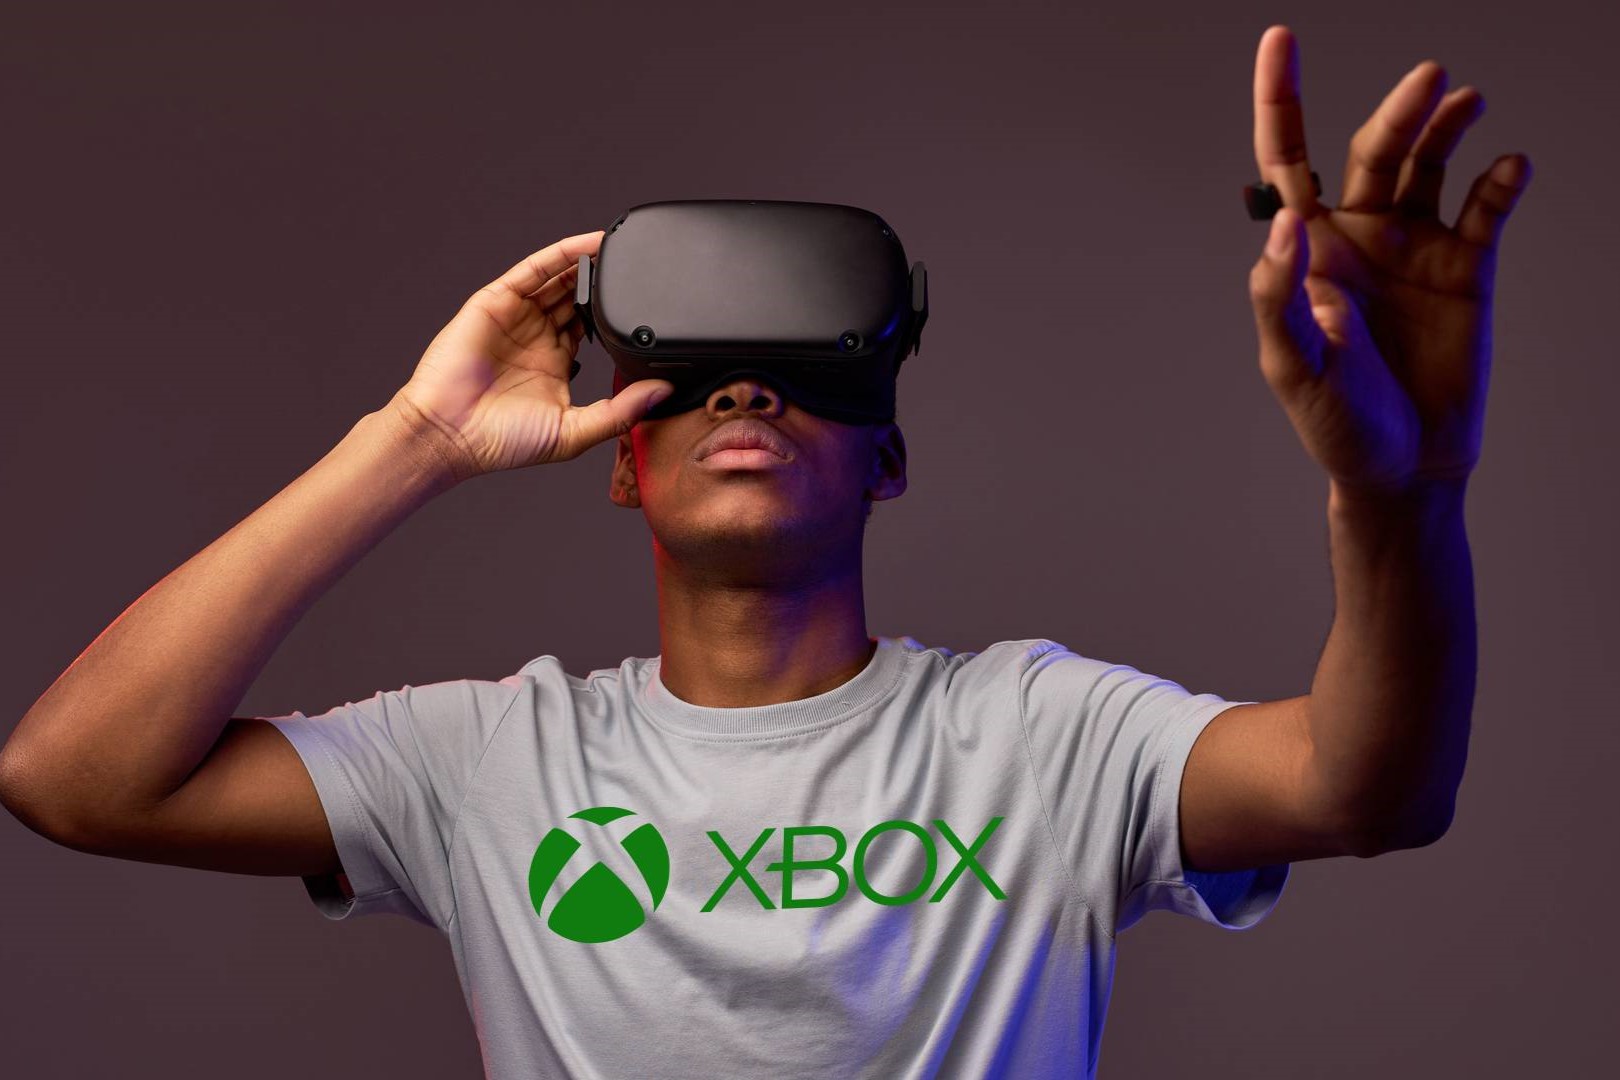 How To Use Xbox One With Oculus Rift